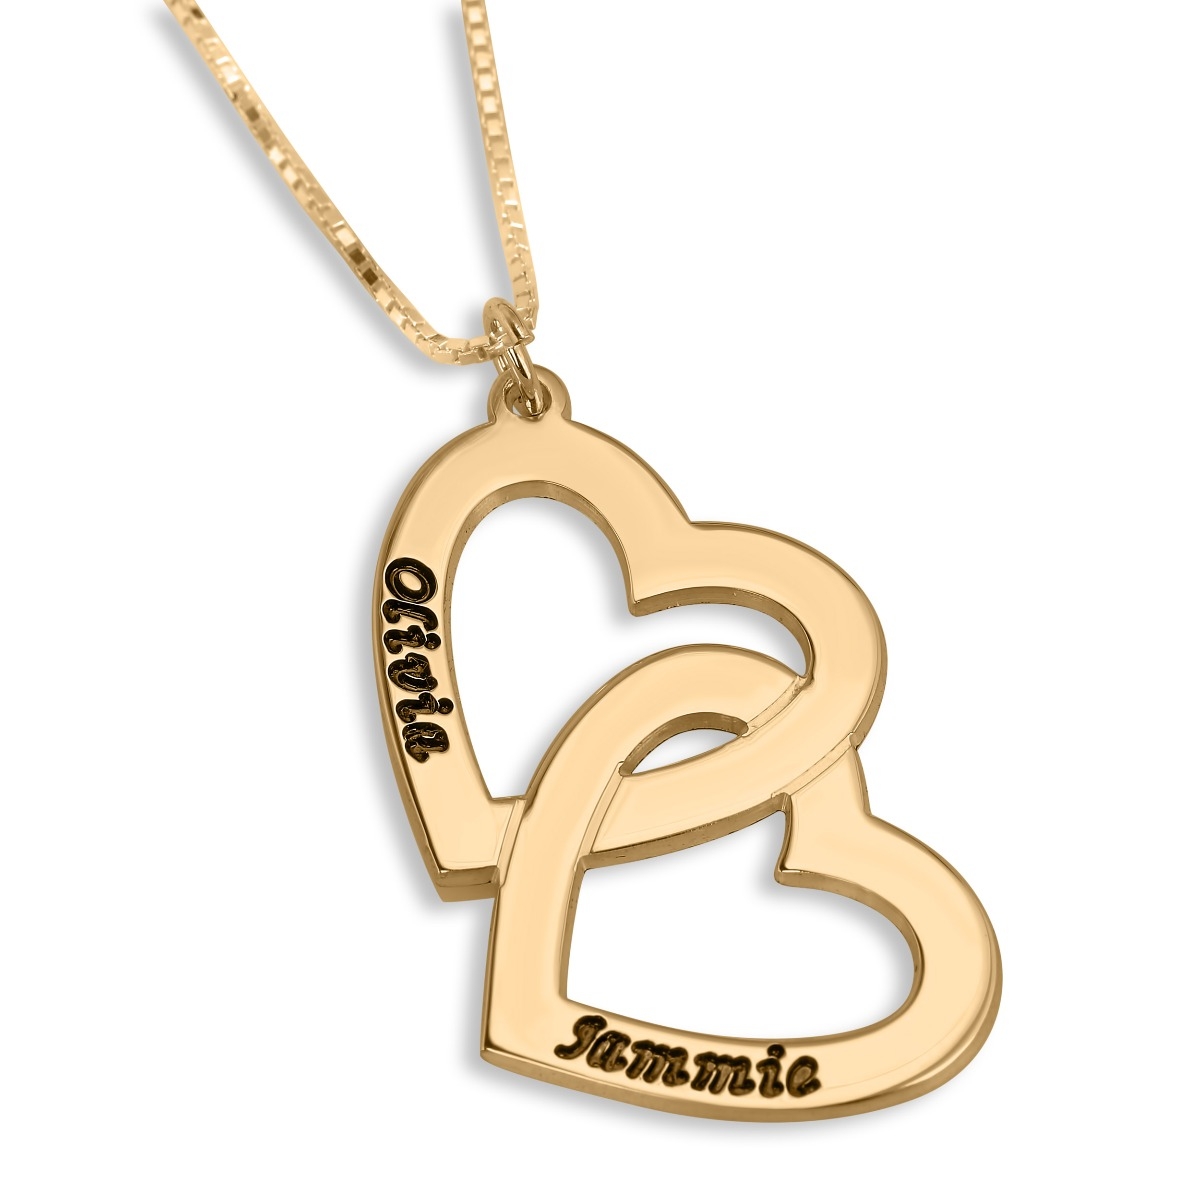 Gold Plated Interlocked Love Hearts Necklace - Up to 2 Names in English/Hebrew - 1